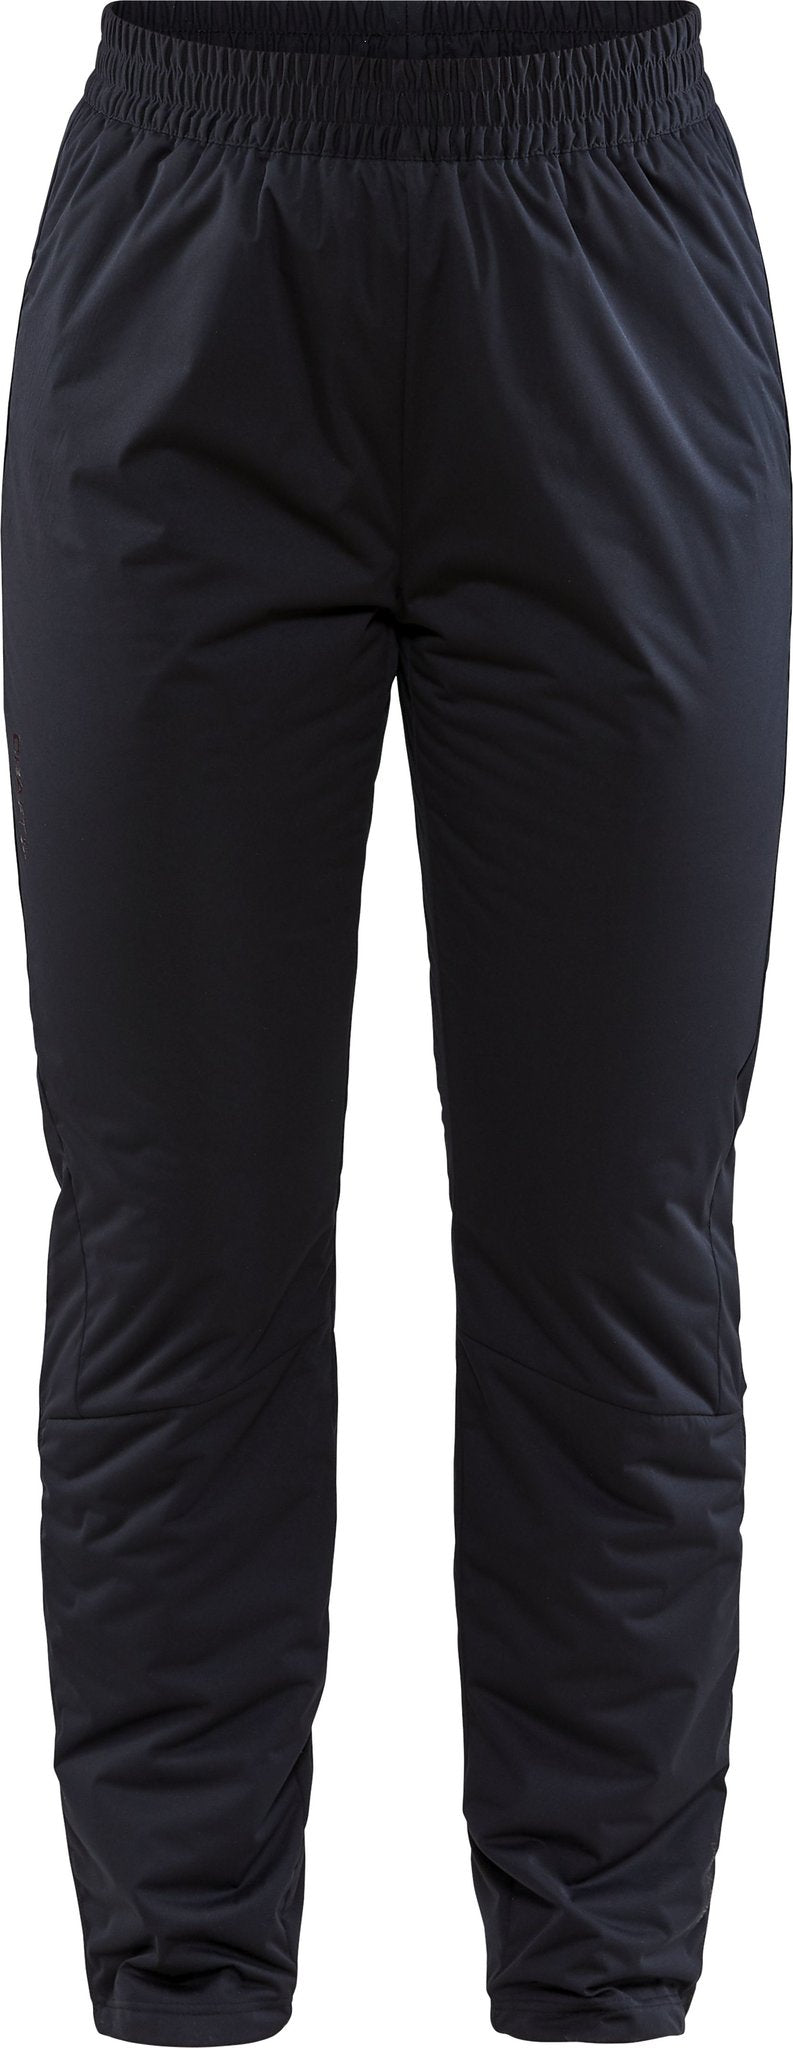 Craft Core Glide Insulated Pants - Women's